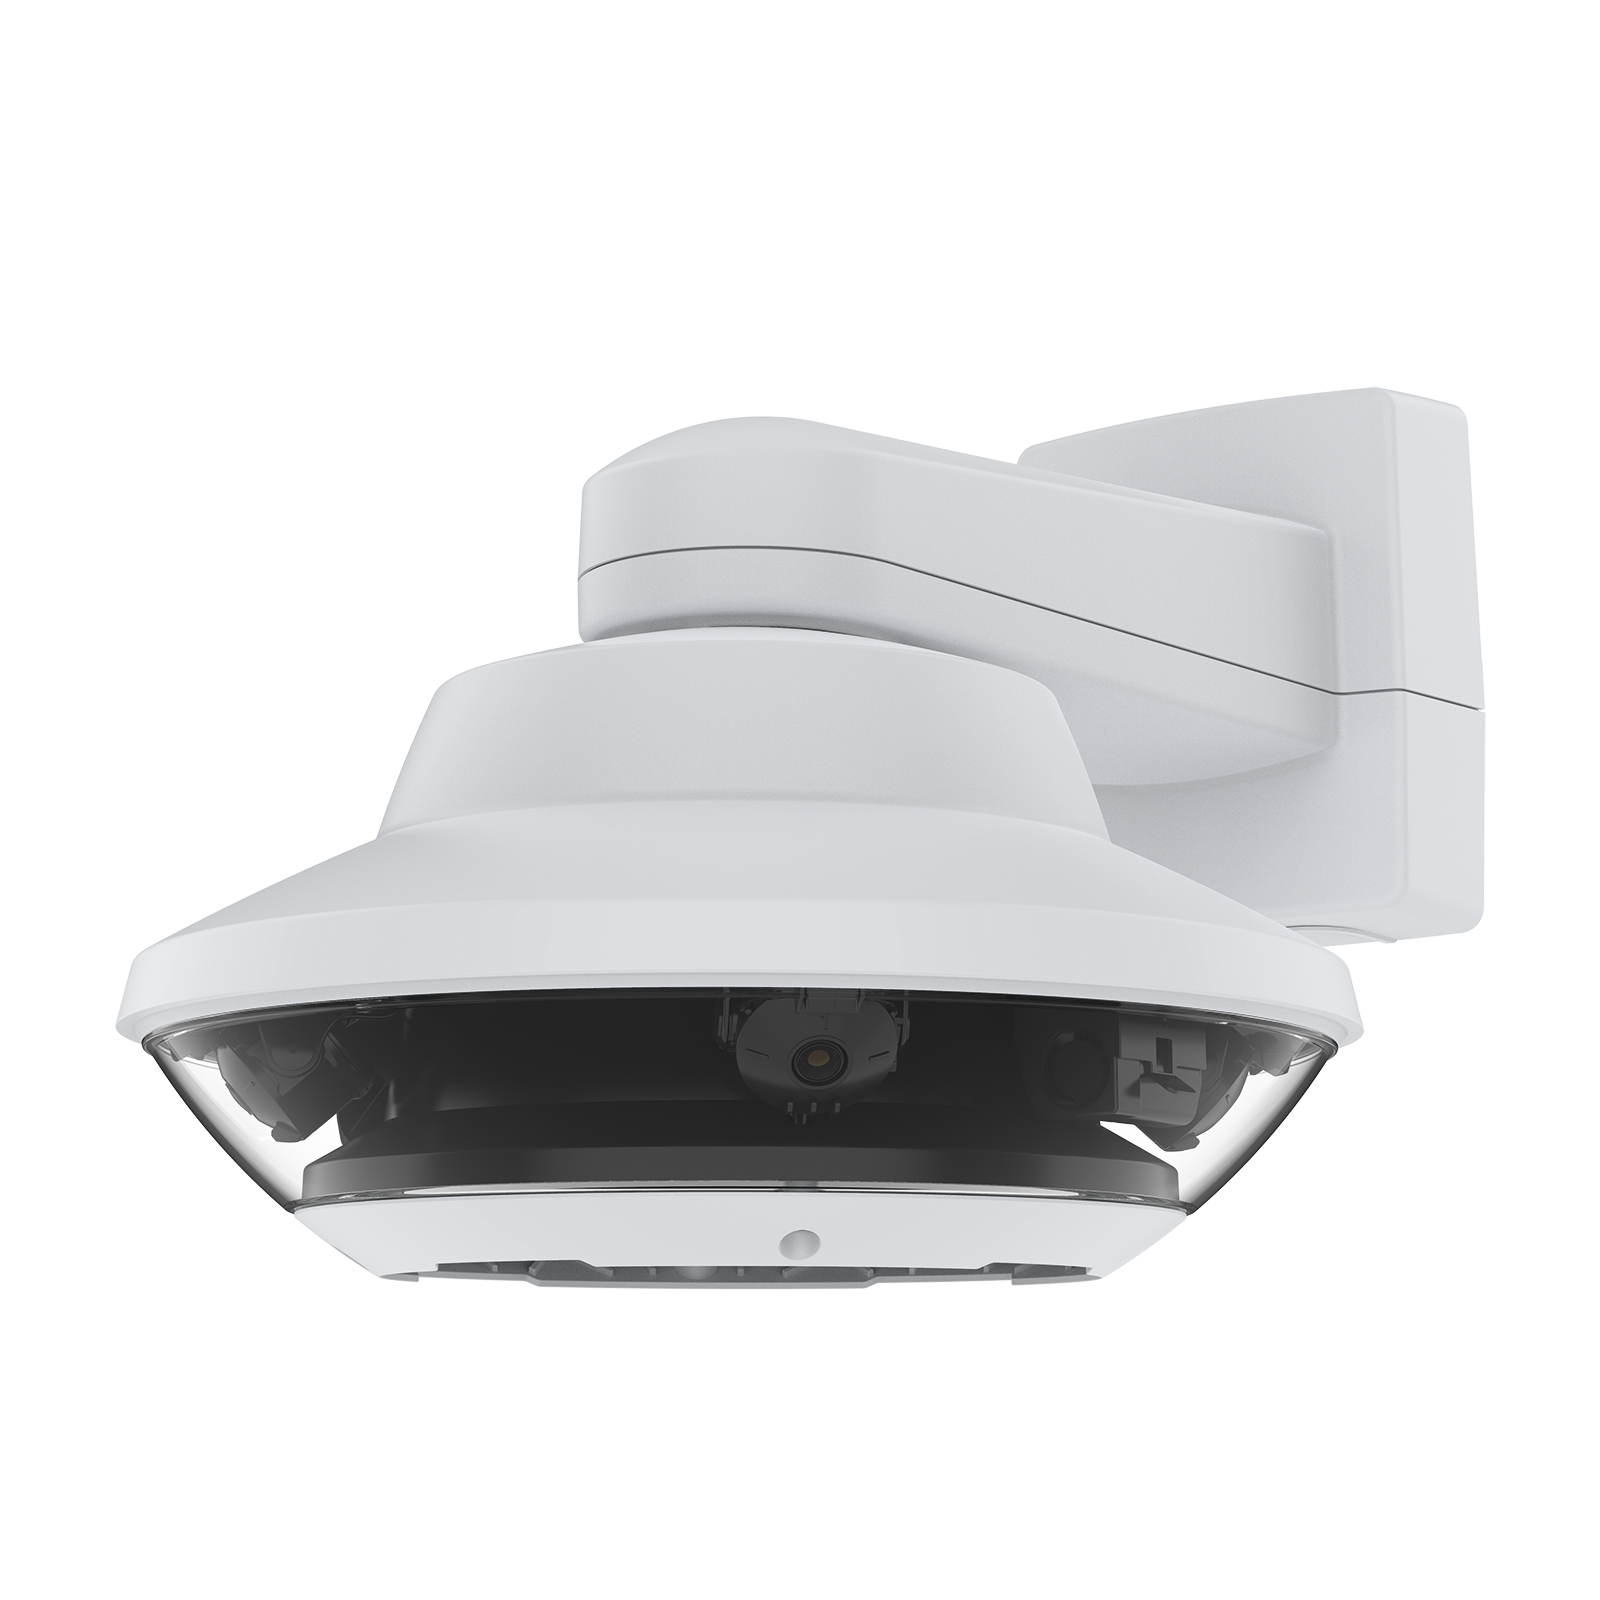 AXIS Q6010-E Network Camera | Building Networks